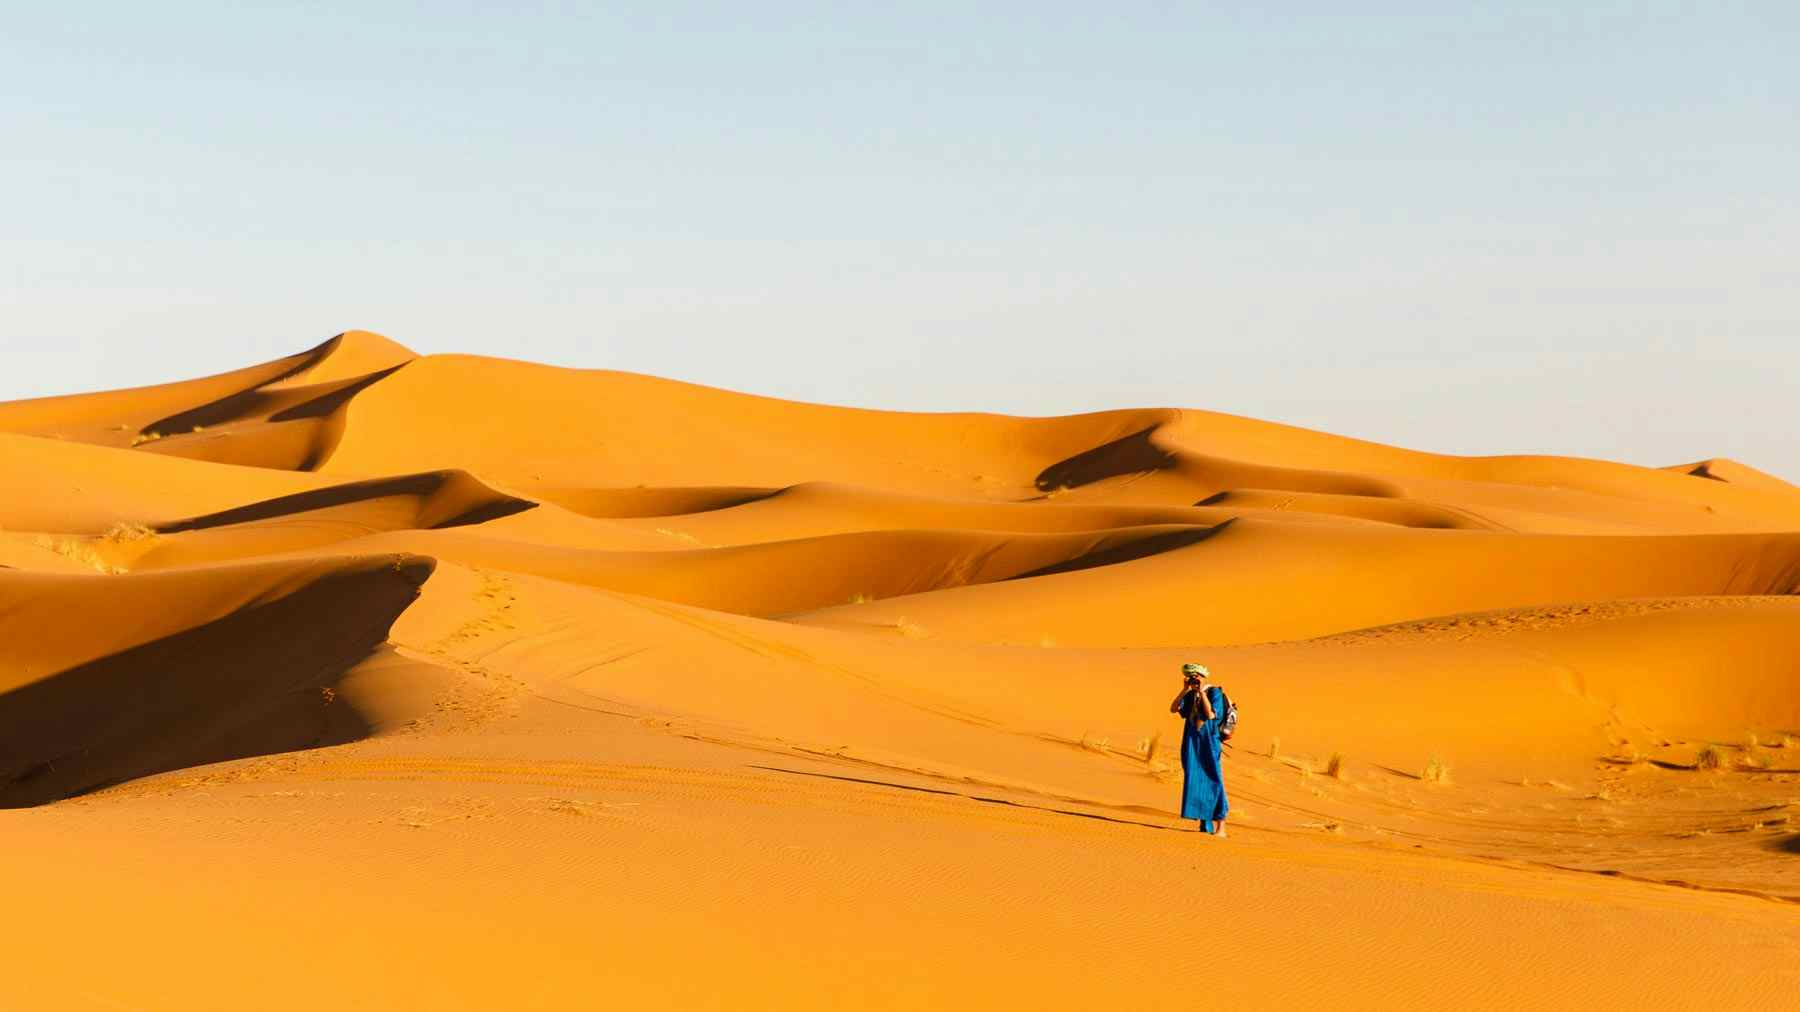 A Berber stands amongst the dunes in the Sahara Desert, Morocco. 